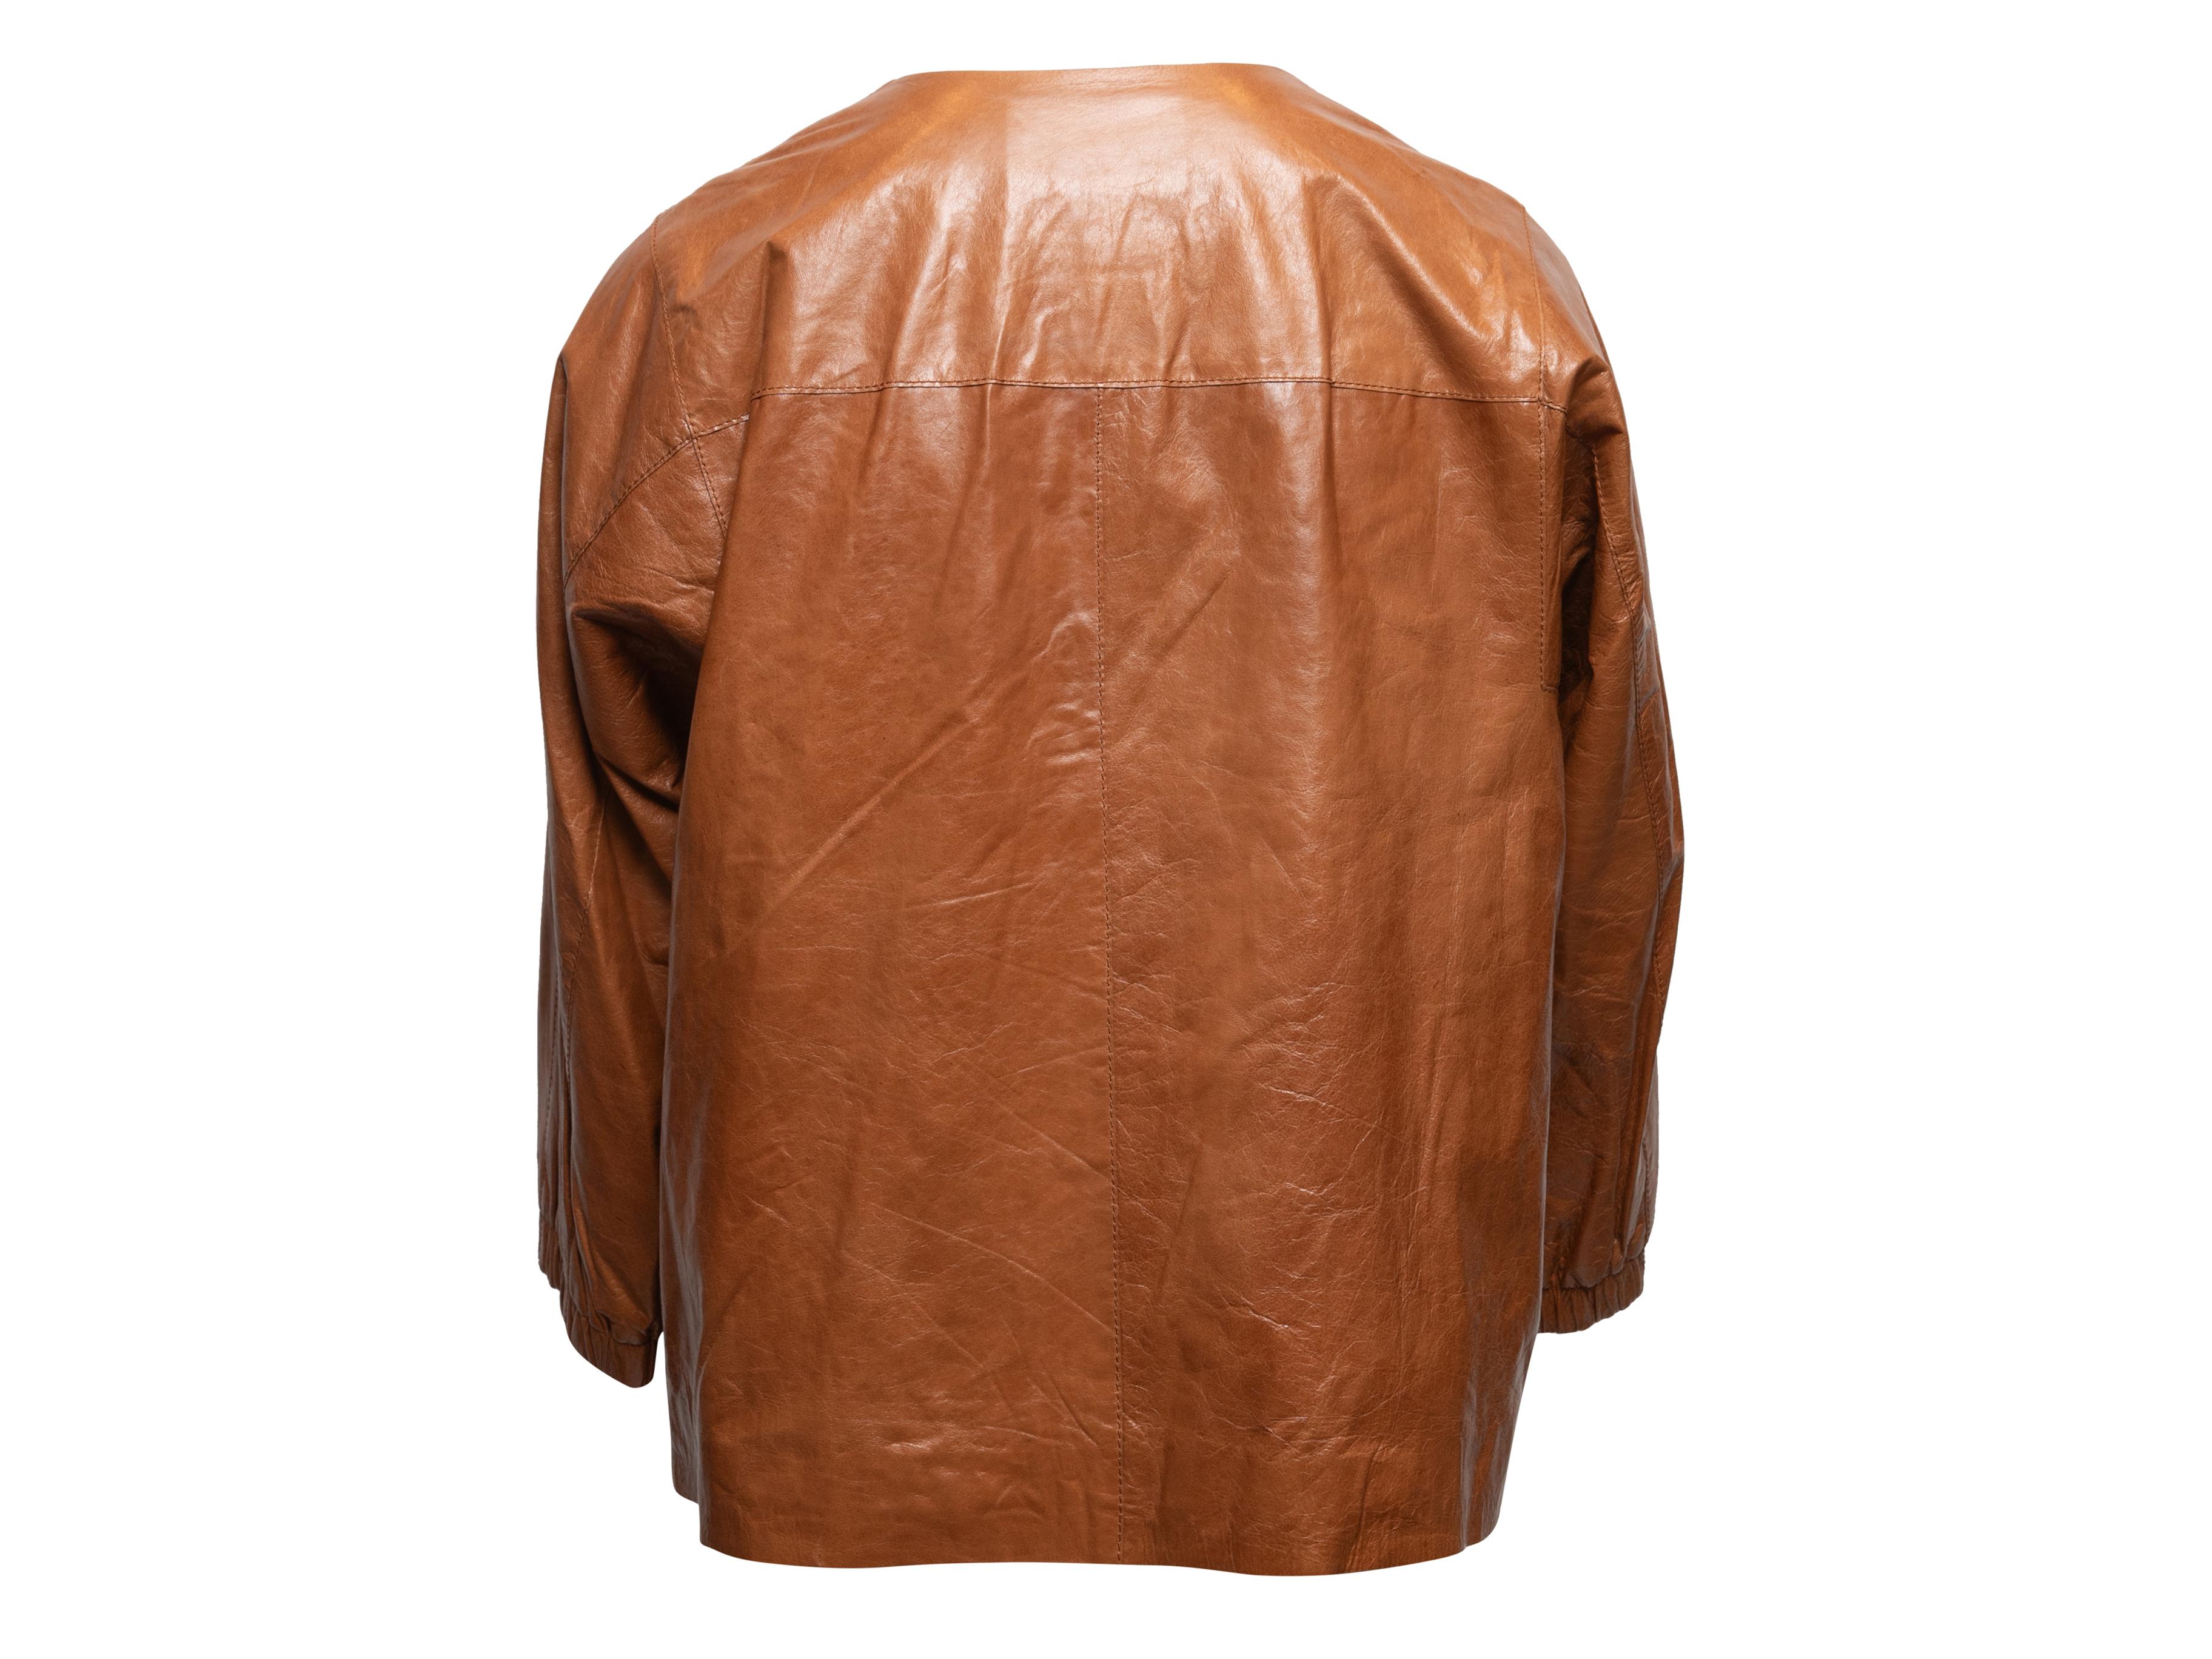 Women's or Men's Brown Lafayette 148 Leather Collarless Jacket Size US M